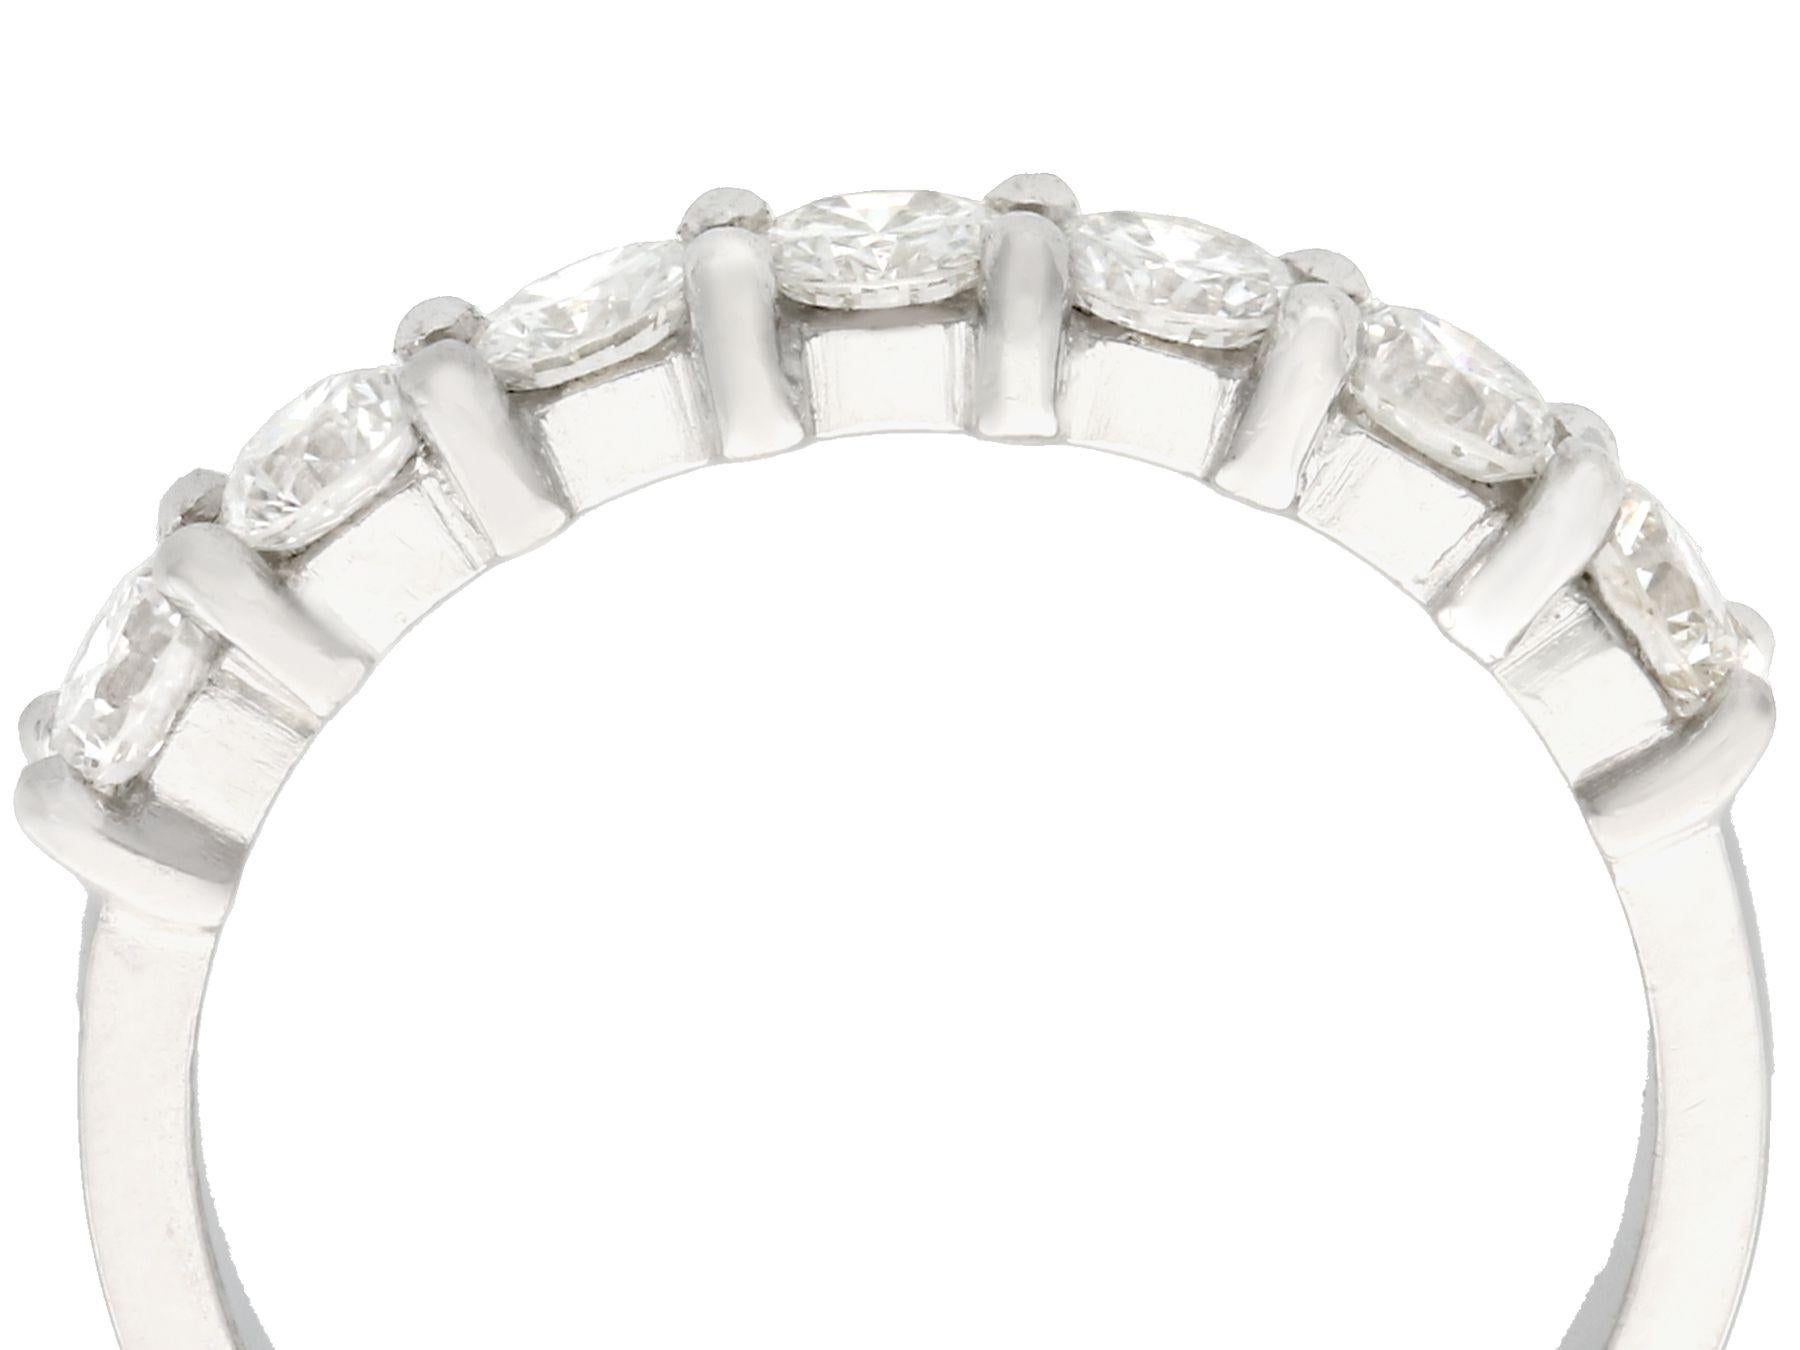 An impressive vintage 1980's 0.77 carat diamond and platinum half eternity ring; part of our diverse diamond jewellery and estate jewelry collections.

This fine and impressive vintage diamond ring has been crafted in platinum.

The half eternity